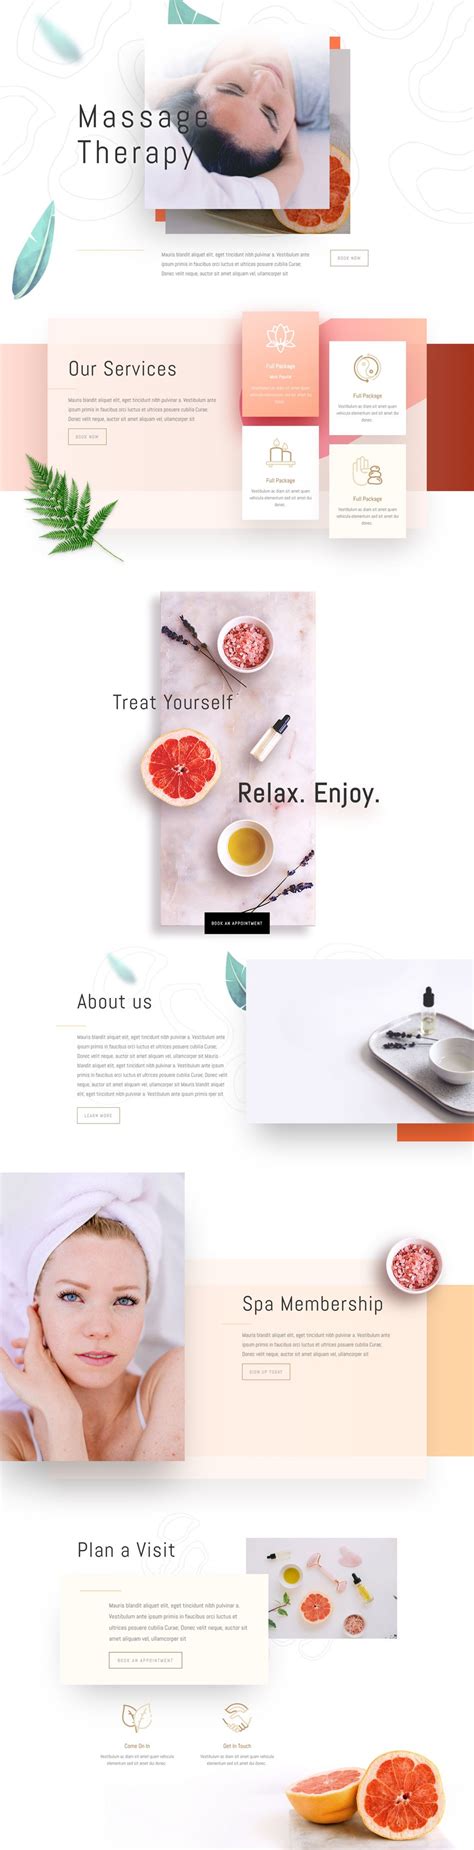 Massage Therapy Landing Page Divi Layout By Elegant Themes